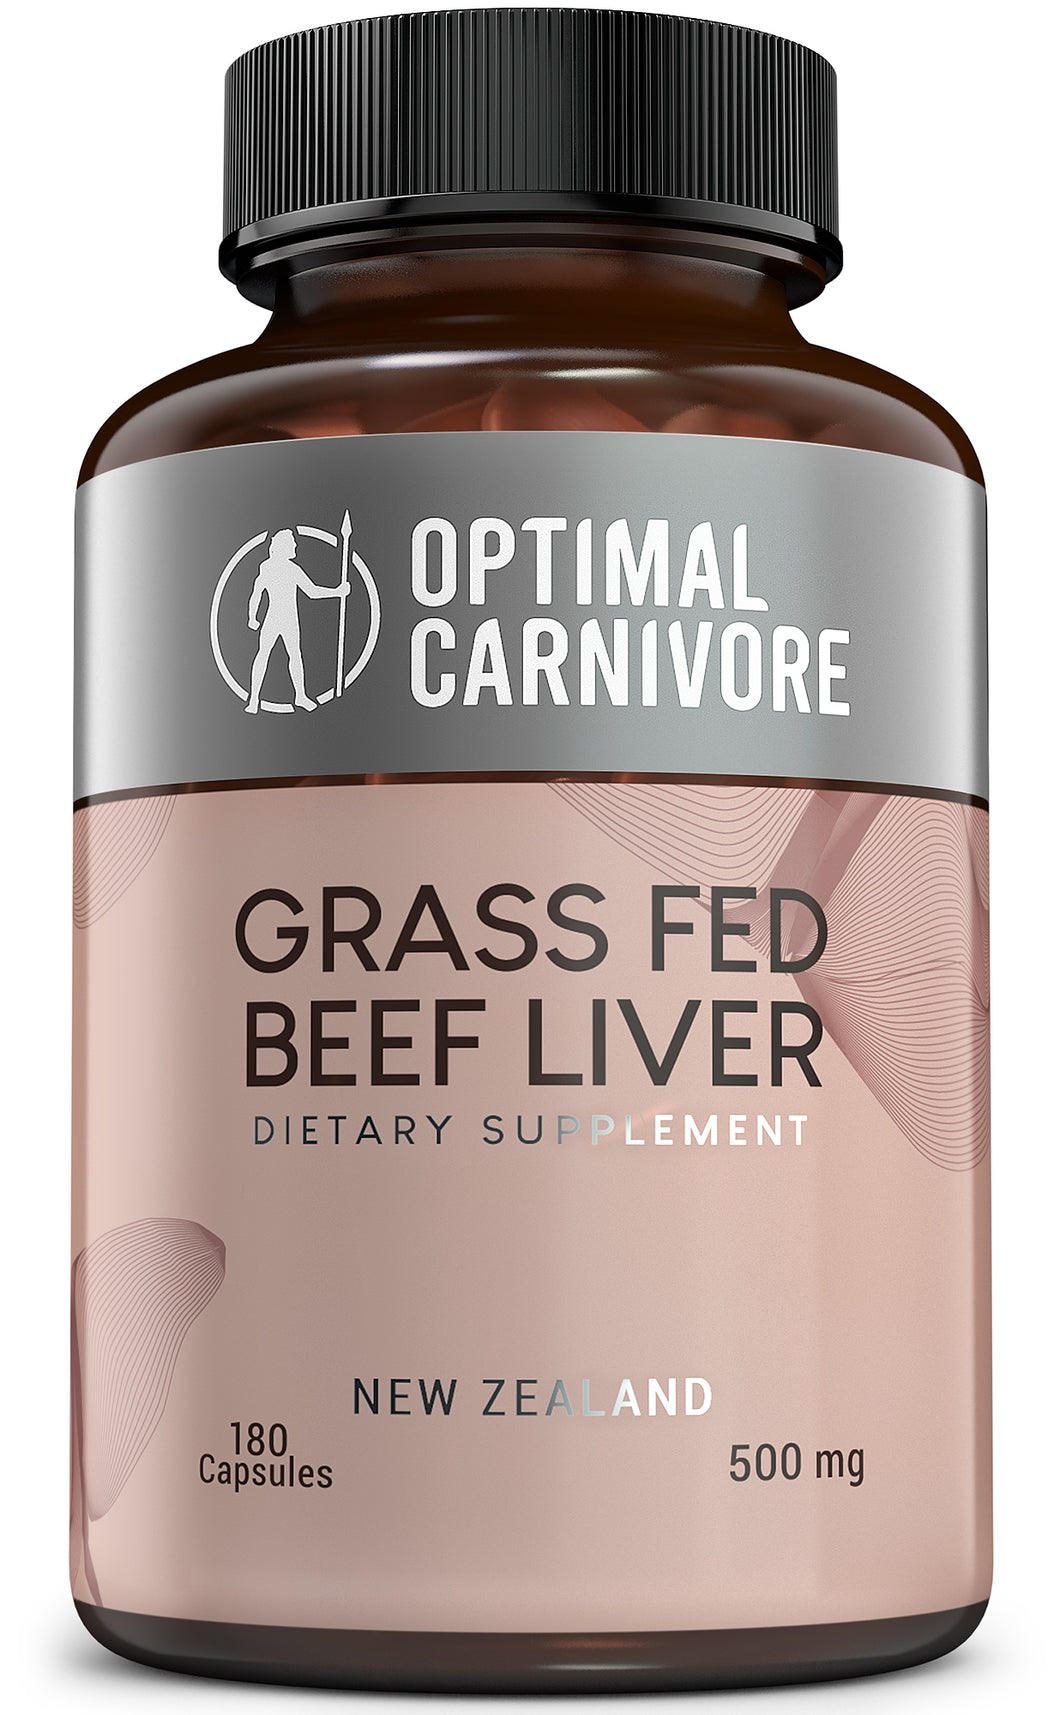 Grass Fed Beef Liver Capsules, Desiccated Beef Liver Supplement, Ancestral Superfood from New Zealand (180 Pills) by Optimal Carnivore